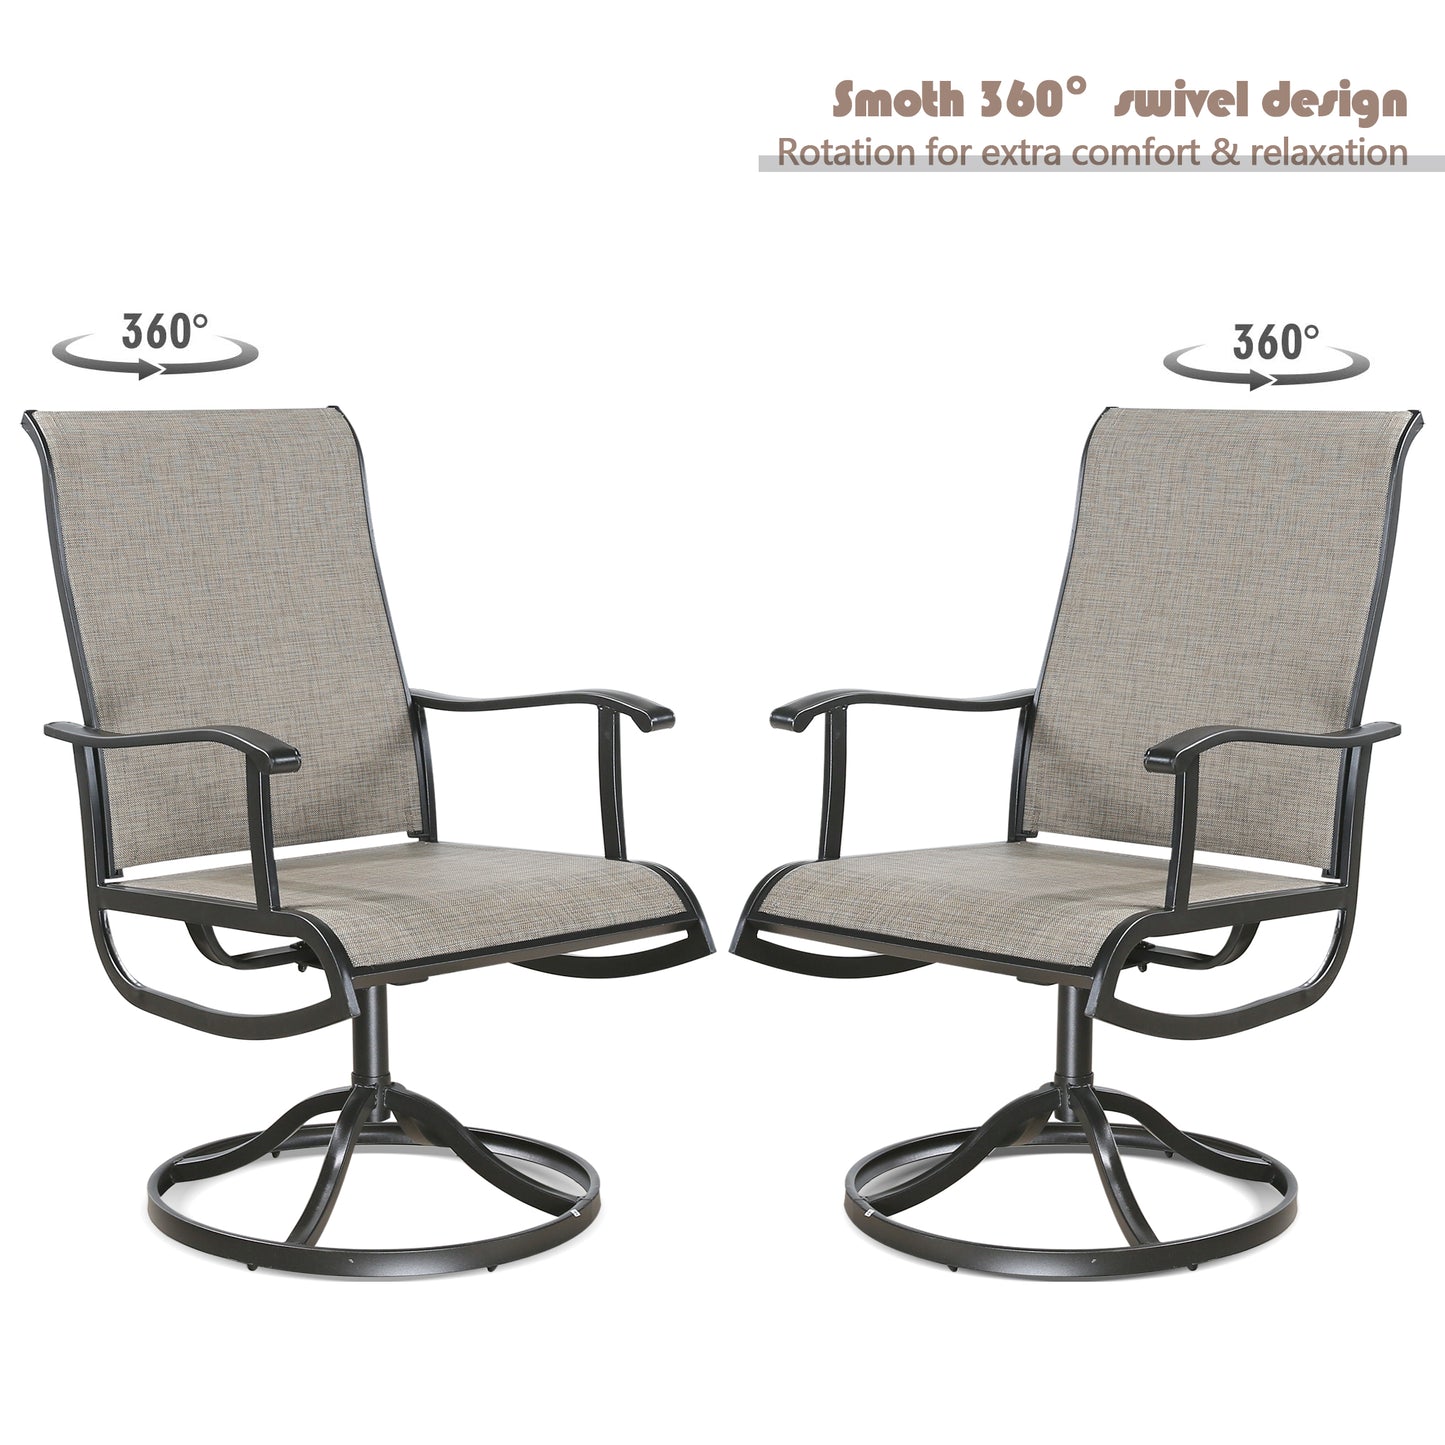 Patio Textilene Mesh Fabric Swivel Dinging Chairs Outdoor Gentle Rocker Chair Set of 2 with High Back and Armrest